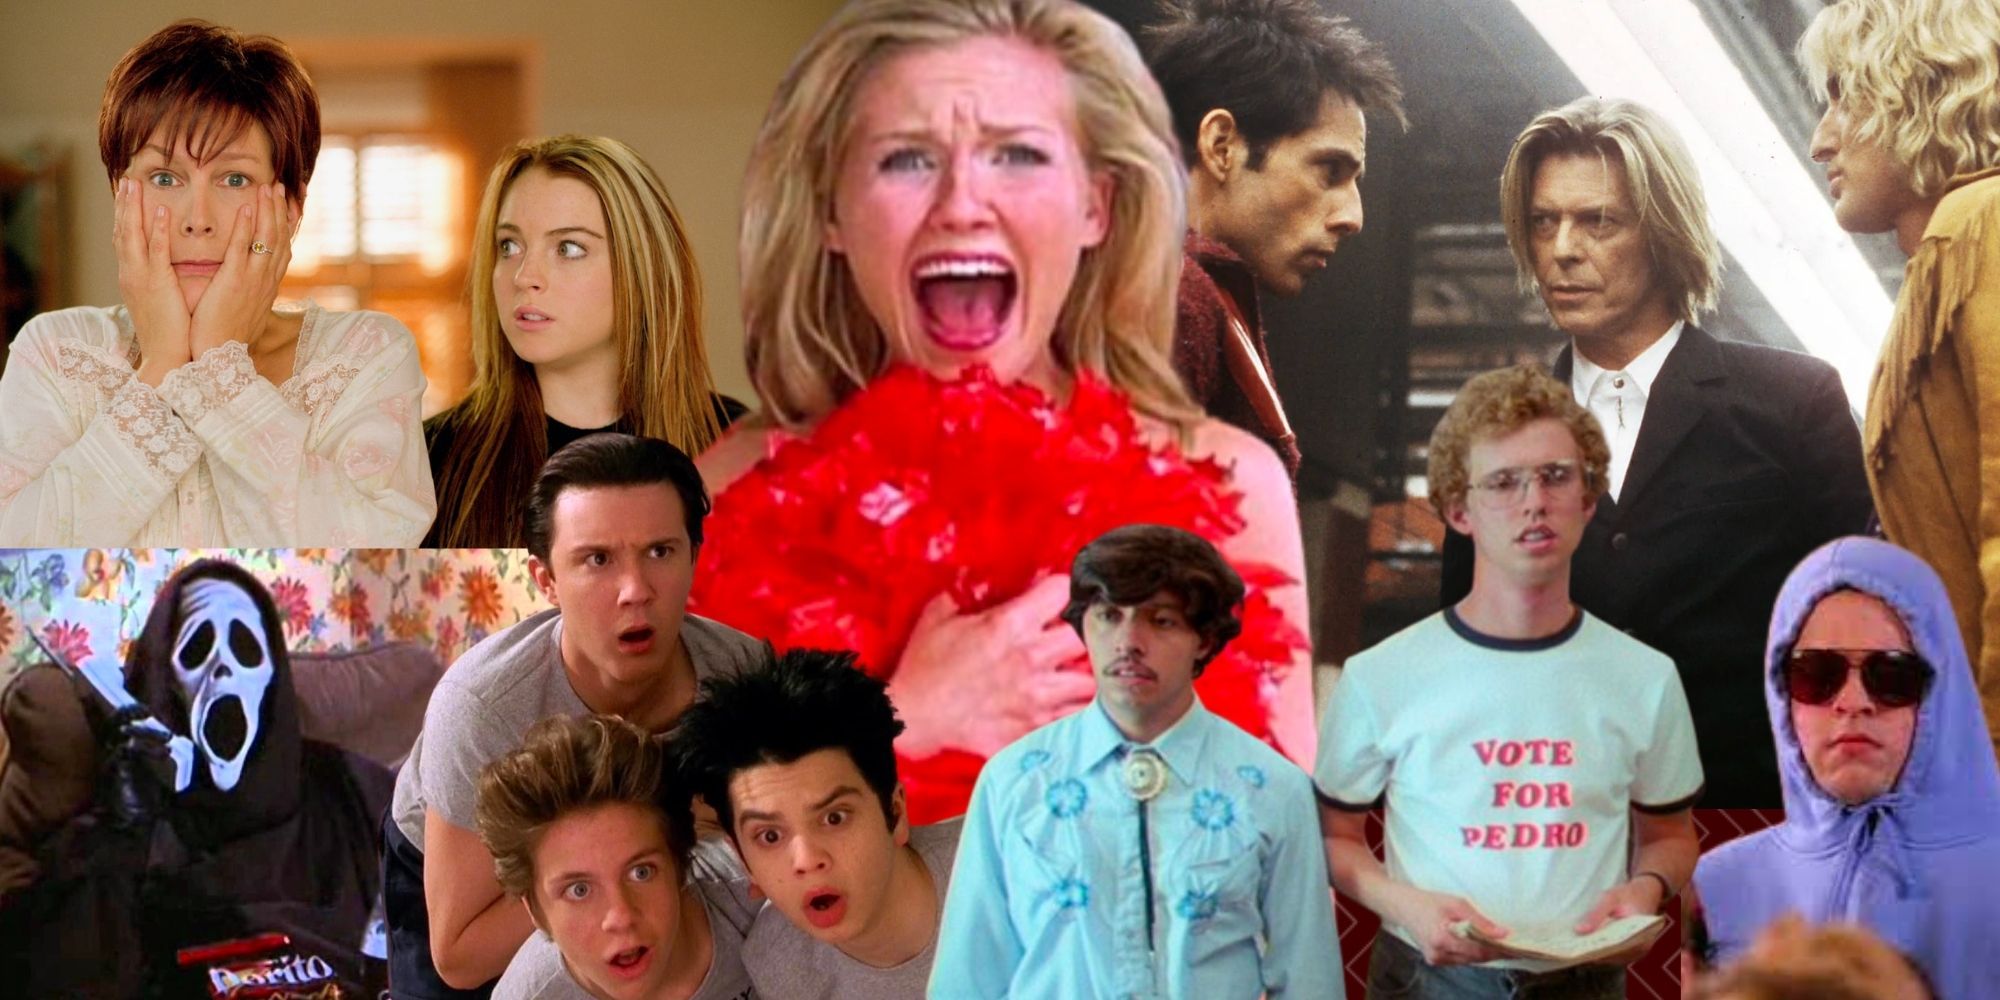 Teen Movies That Defined the Early 2000s collage of the movies features in the article